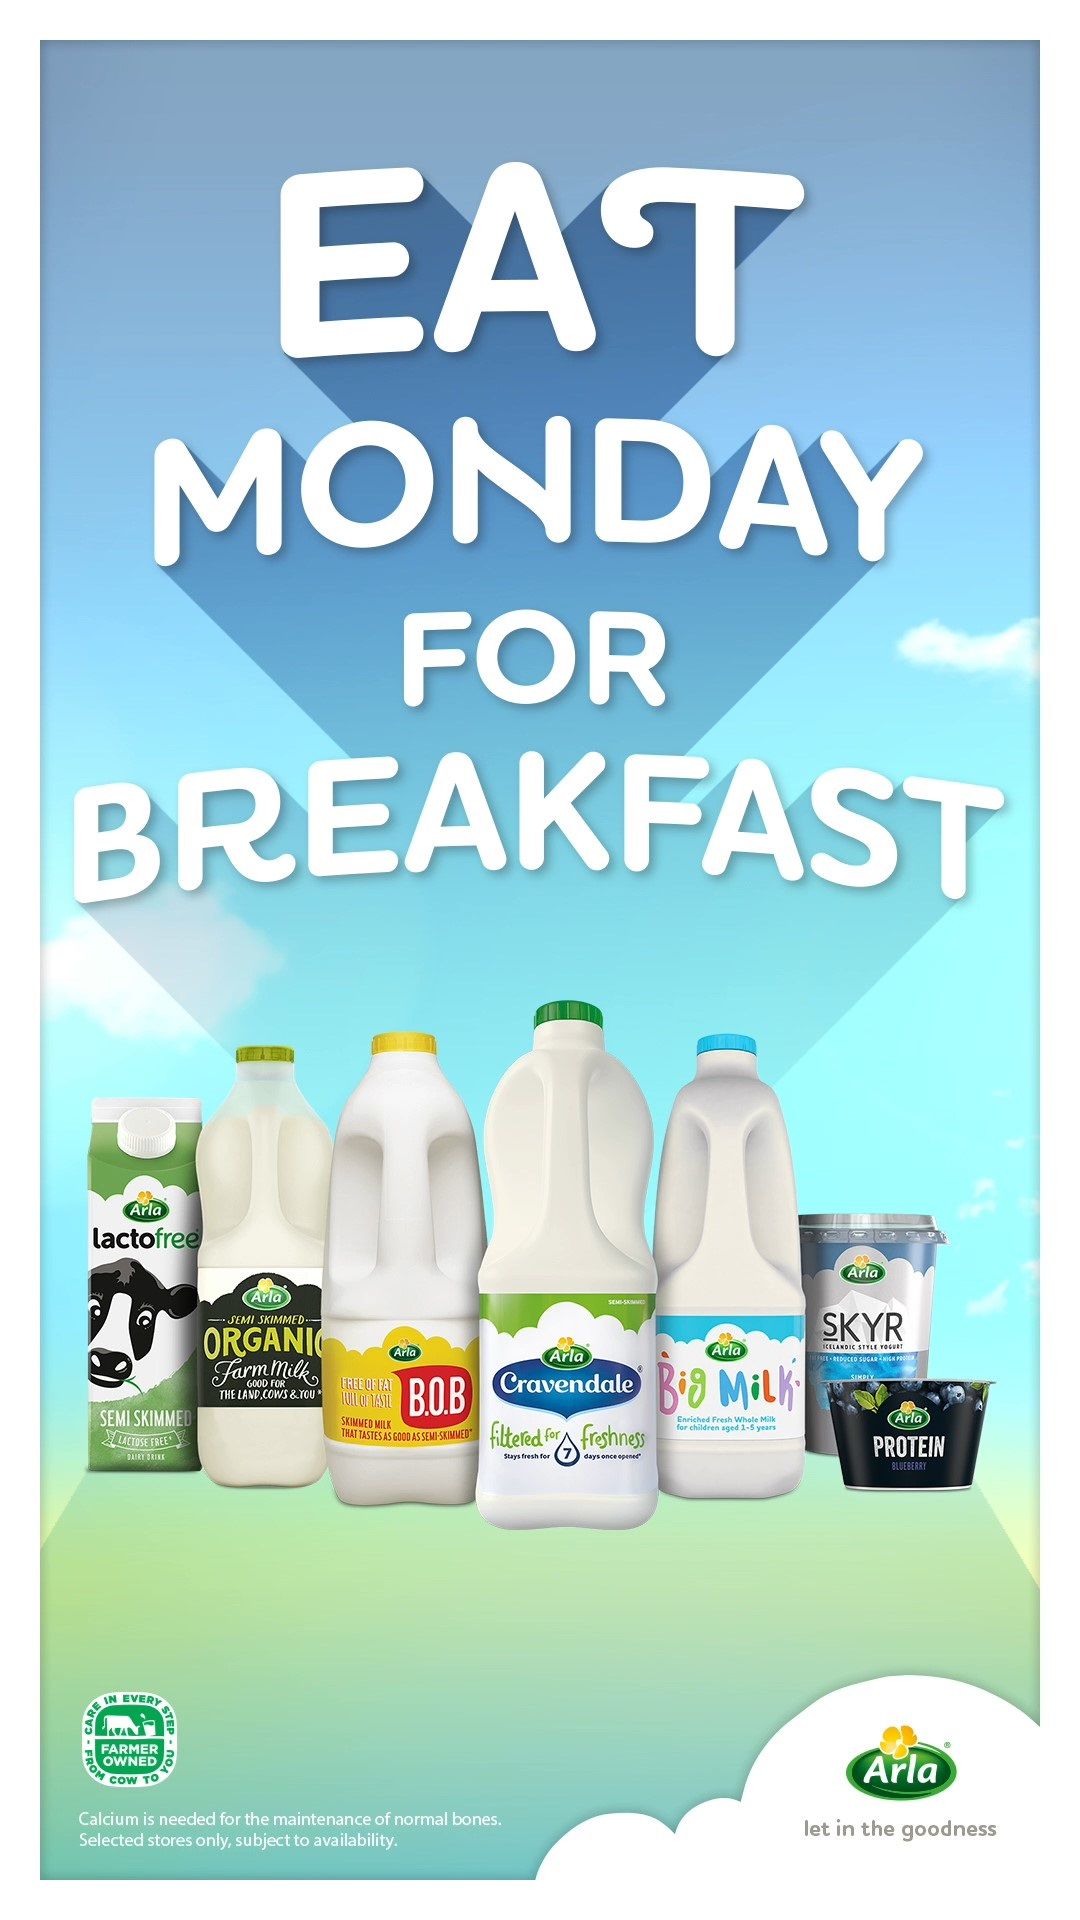 Arla Foods invites people to 'Eat Monday for Breakfast' with new campaign